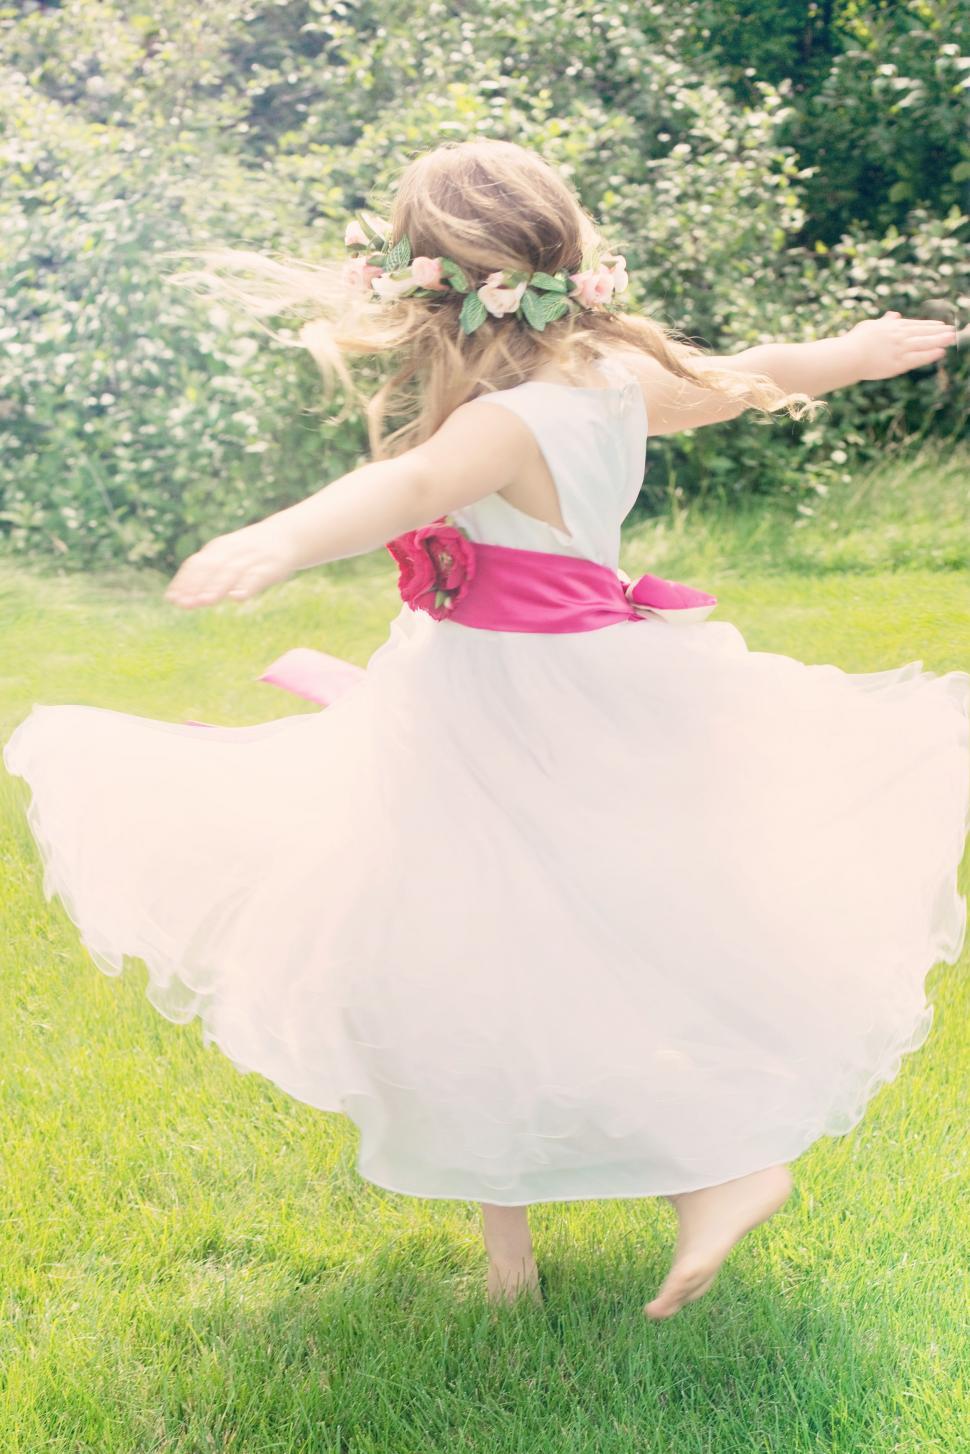 Free Image of Little Girl dancing in the park 